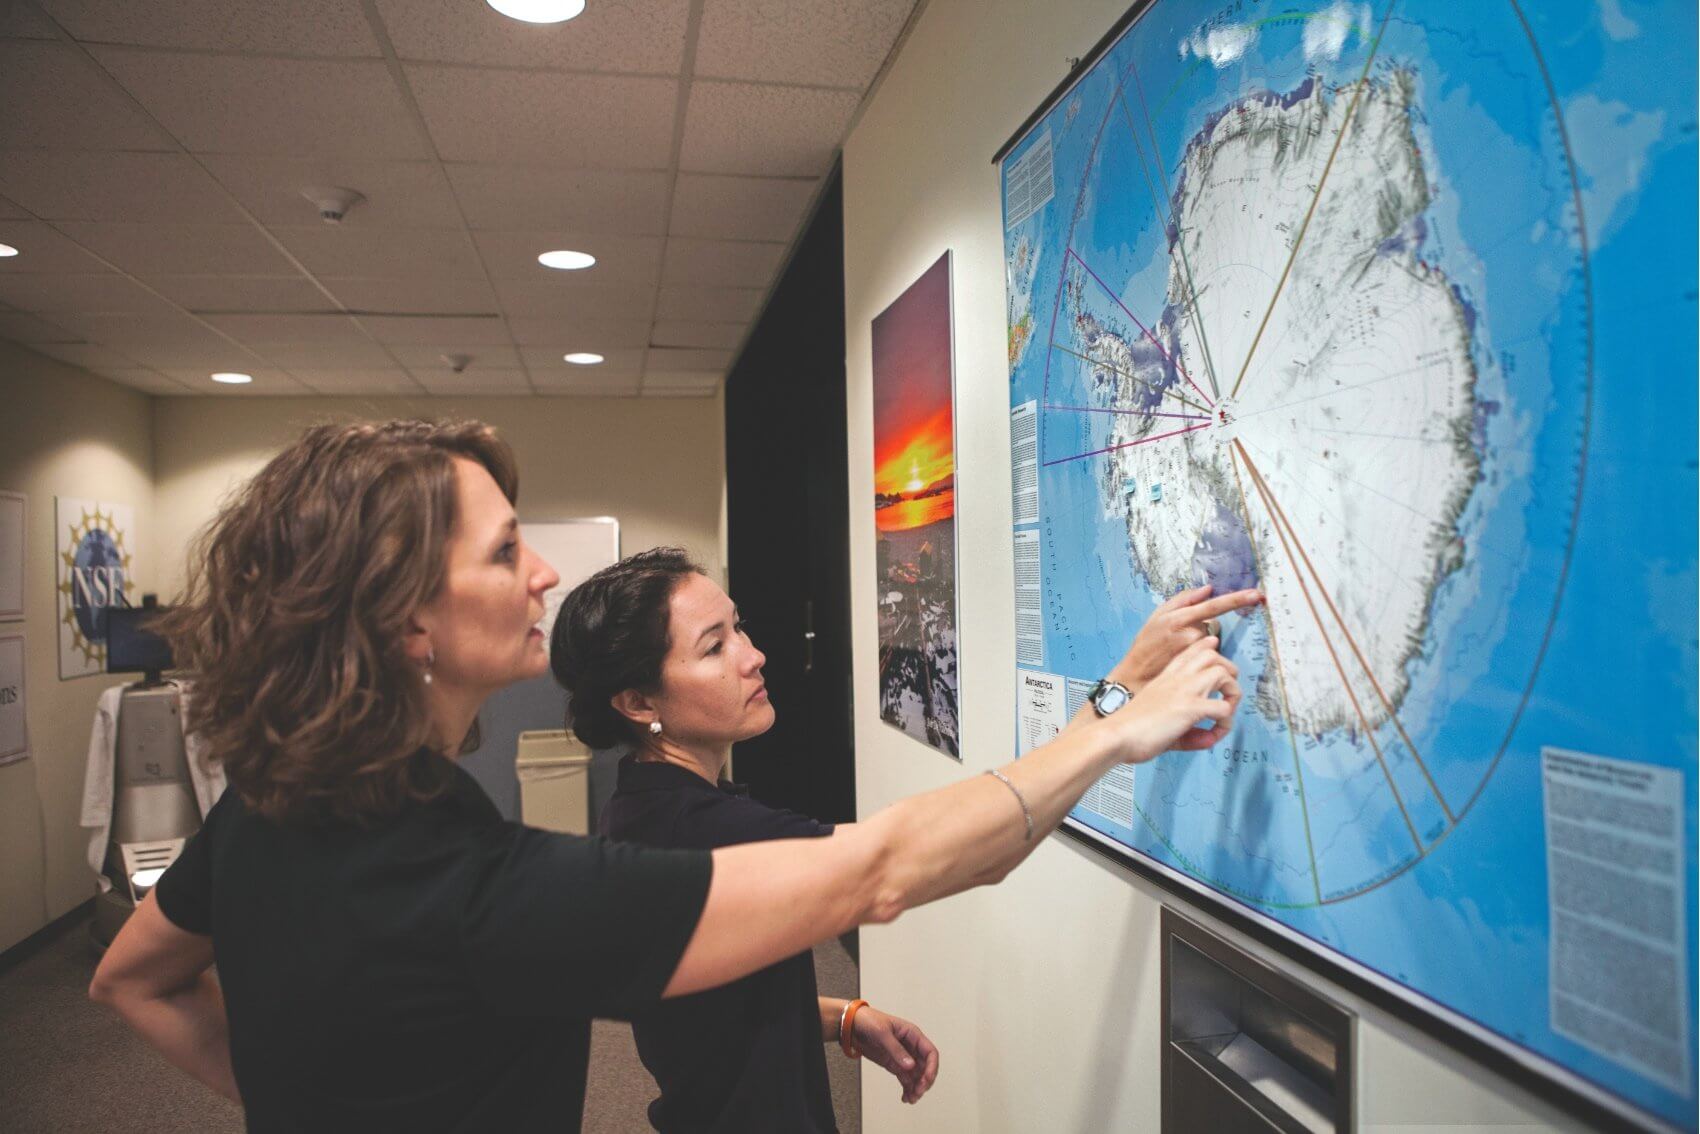 Tarah Castleberry, DO, MPH, and Natacha Chough, M.D., MPH, identify McMurdo Station—a U.S. Antarctic research center located on the southern tip of Ross Island.